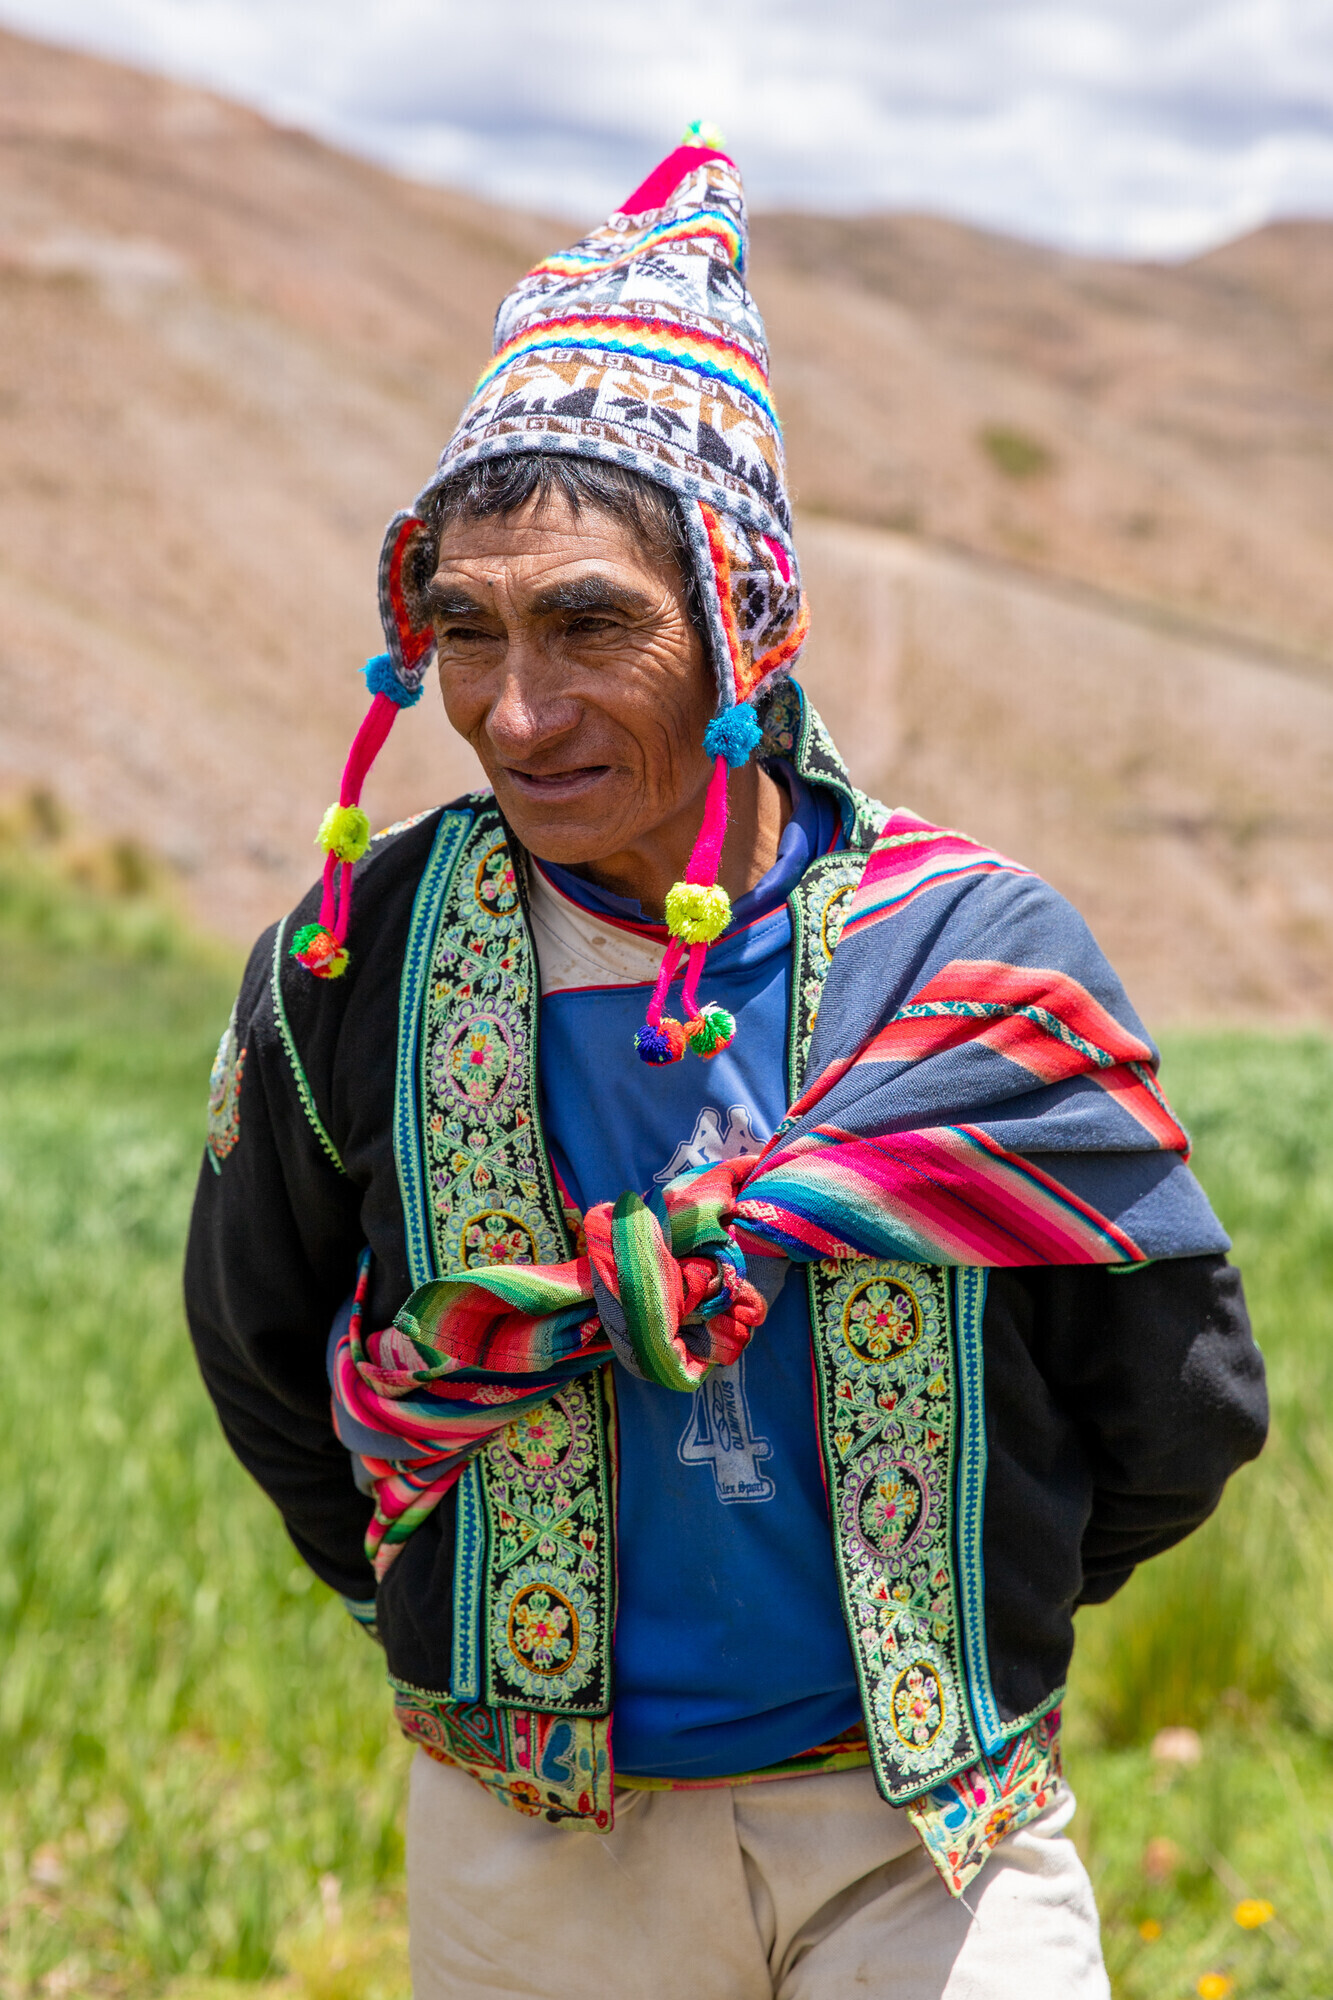 An Indigenous Bolivian man in a colorful, pointy hat 